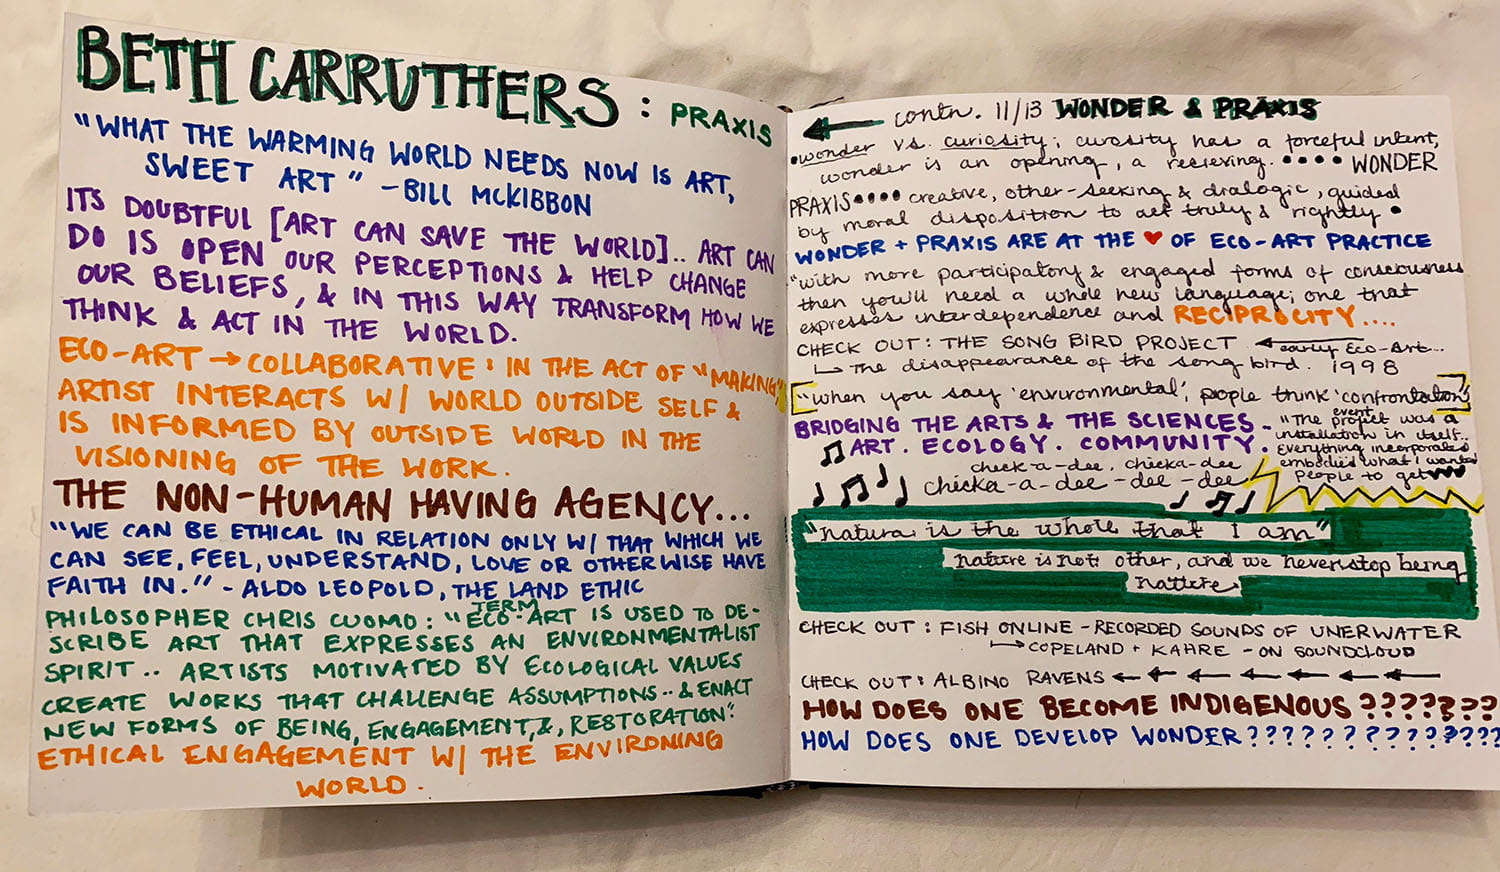 two-page journal entry titled "Beth Carruthers: Praxis" filled with notes and quotes about the environment